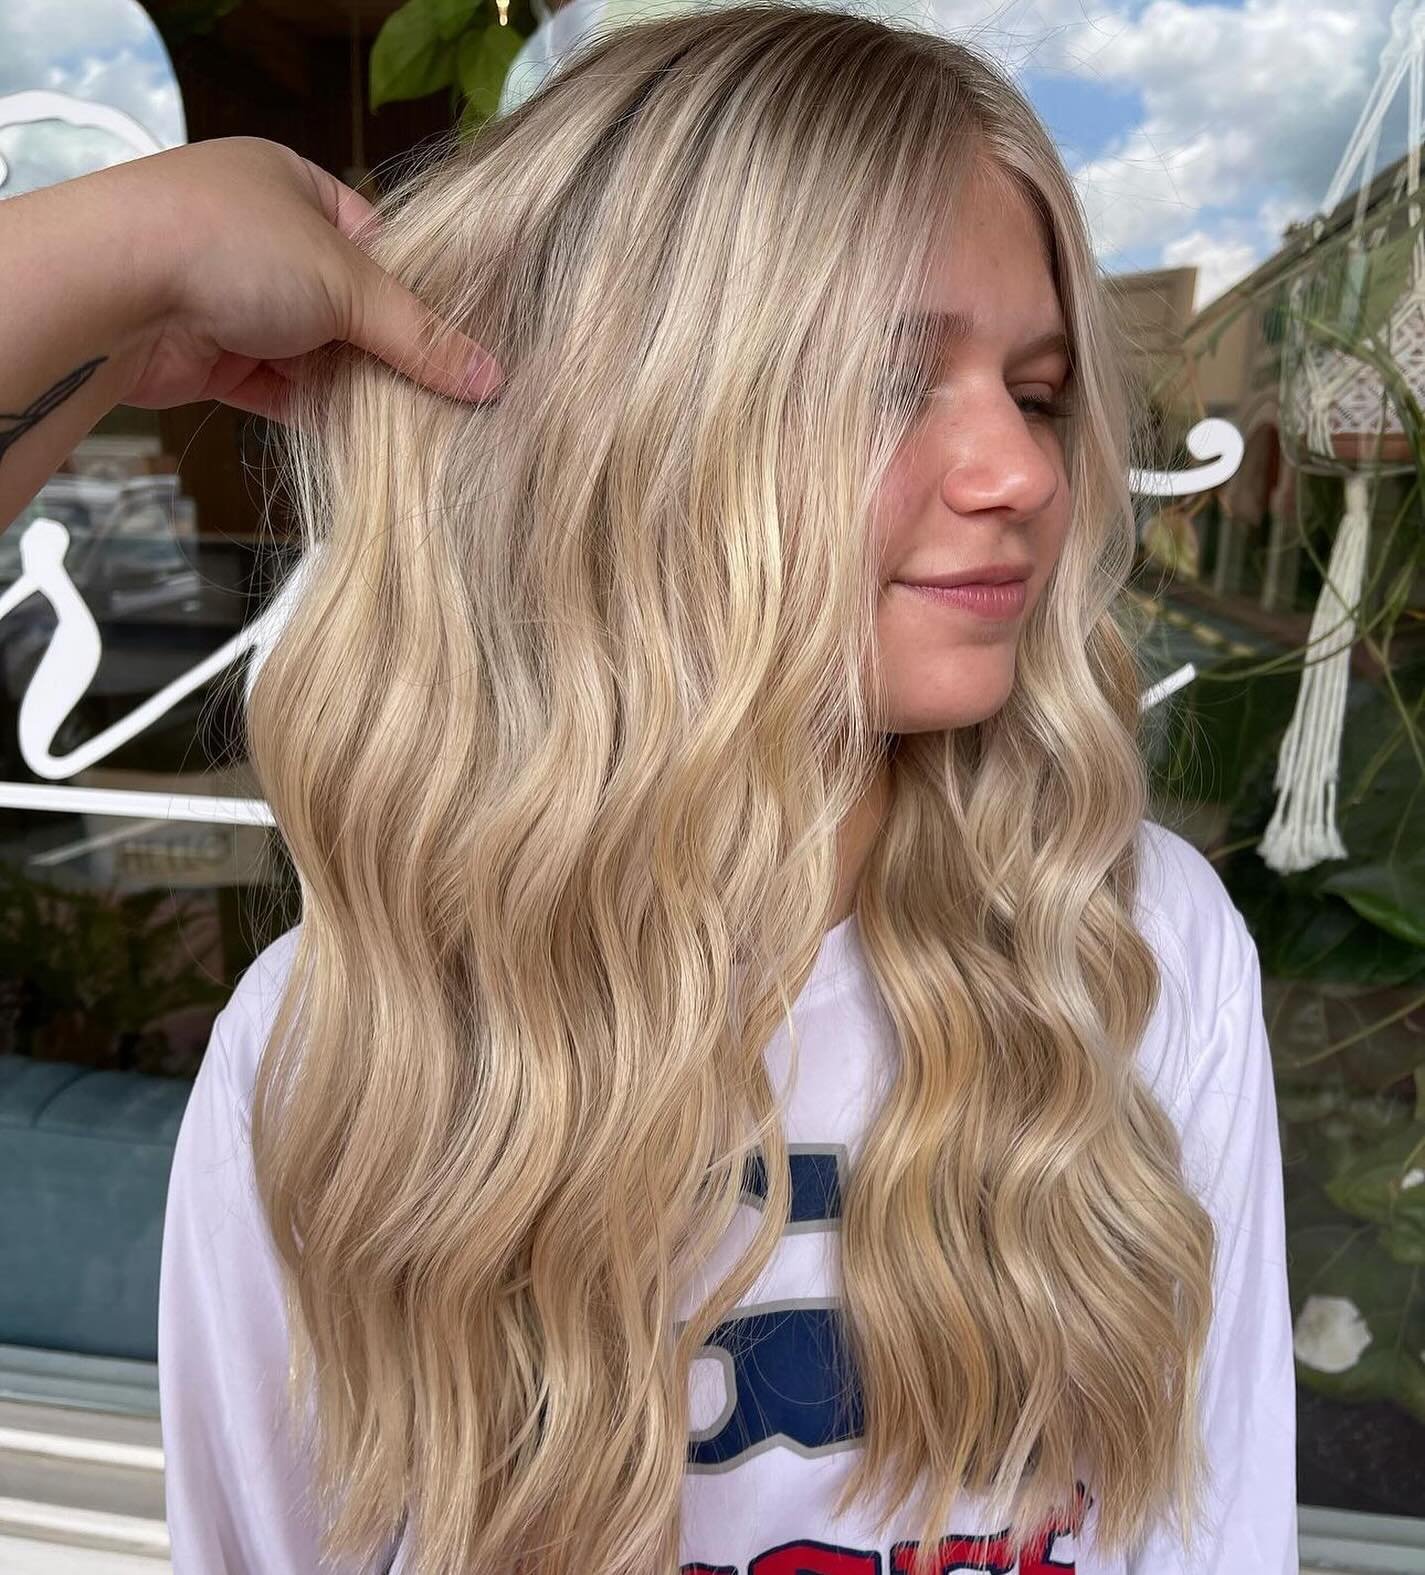 ⭐️ New Talent ⭐️
@manes.by.ari is taking guests Now!!!!
And her work is Gorgeous!!!!
Here&rsquo;s a Cutie Blondie!!!
.
#trustandmanesalon #blonde #blondehair #foilayage #augustaga #augustasalon